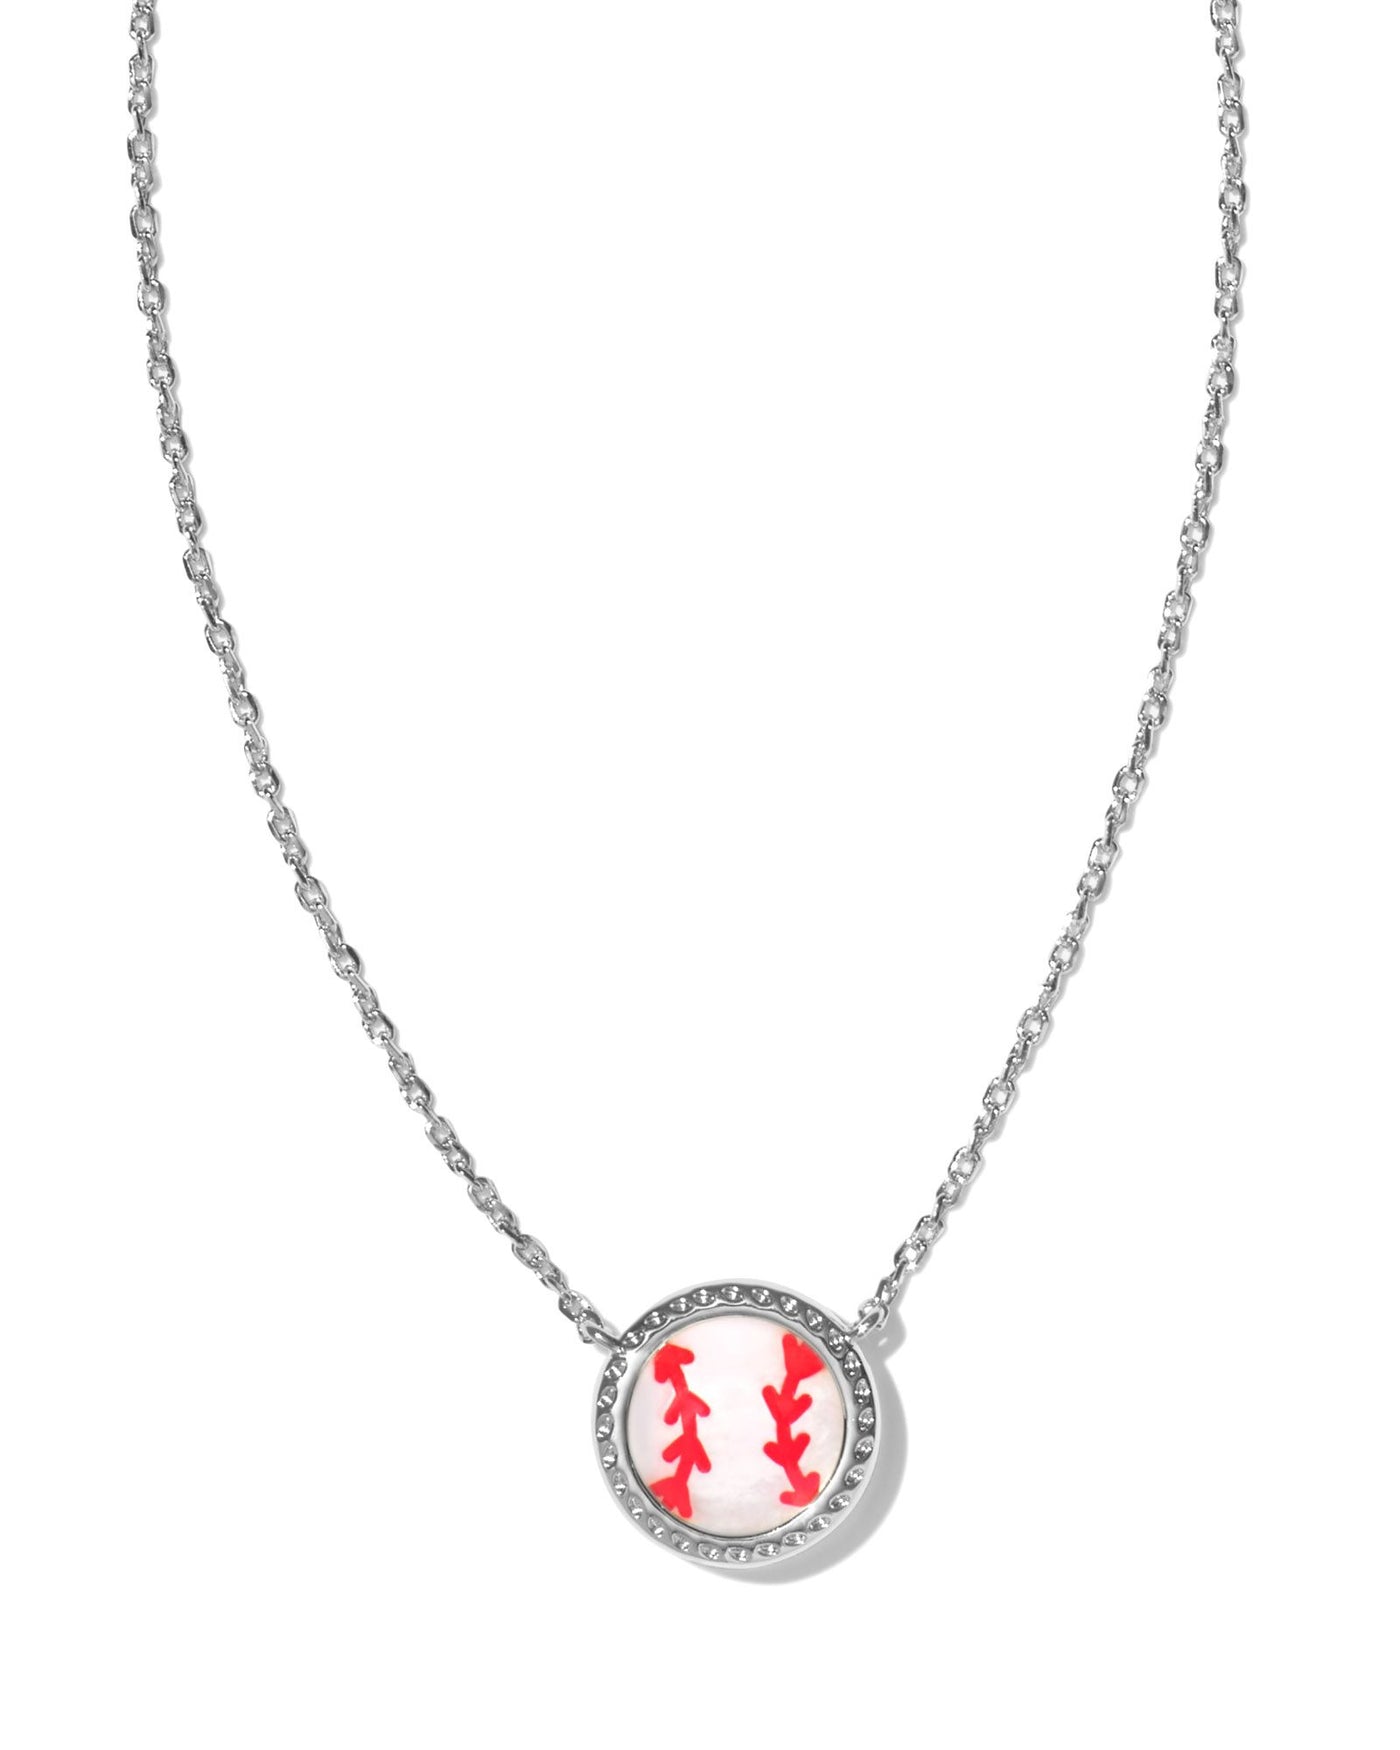 Kendra Scott Baseball Pendant Necklace in Silver on white background close up.